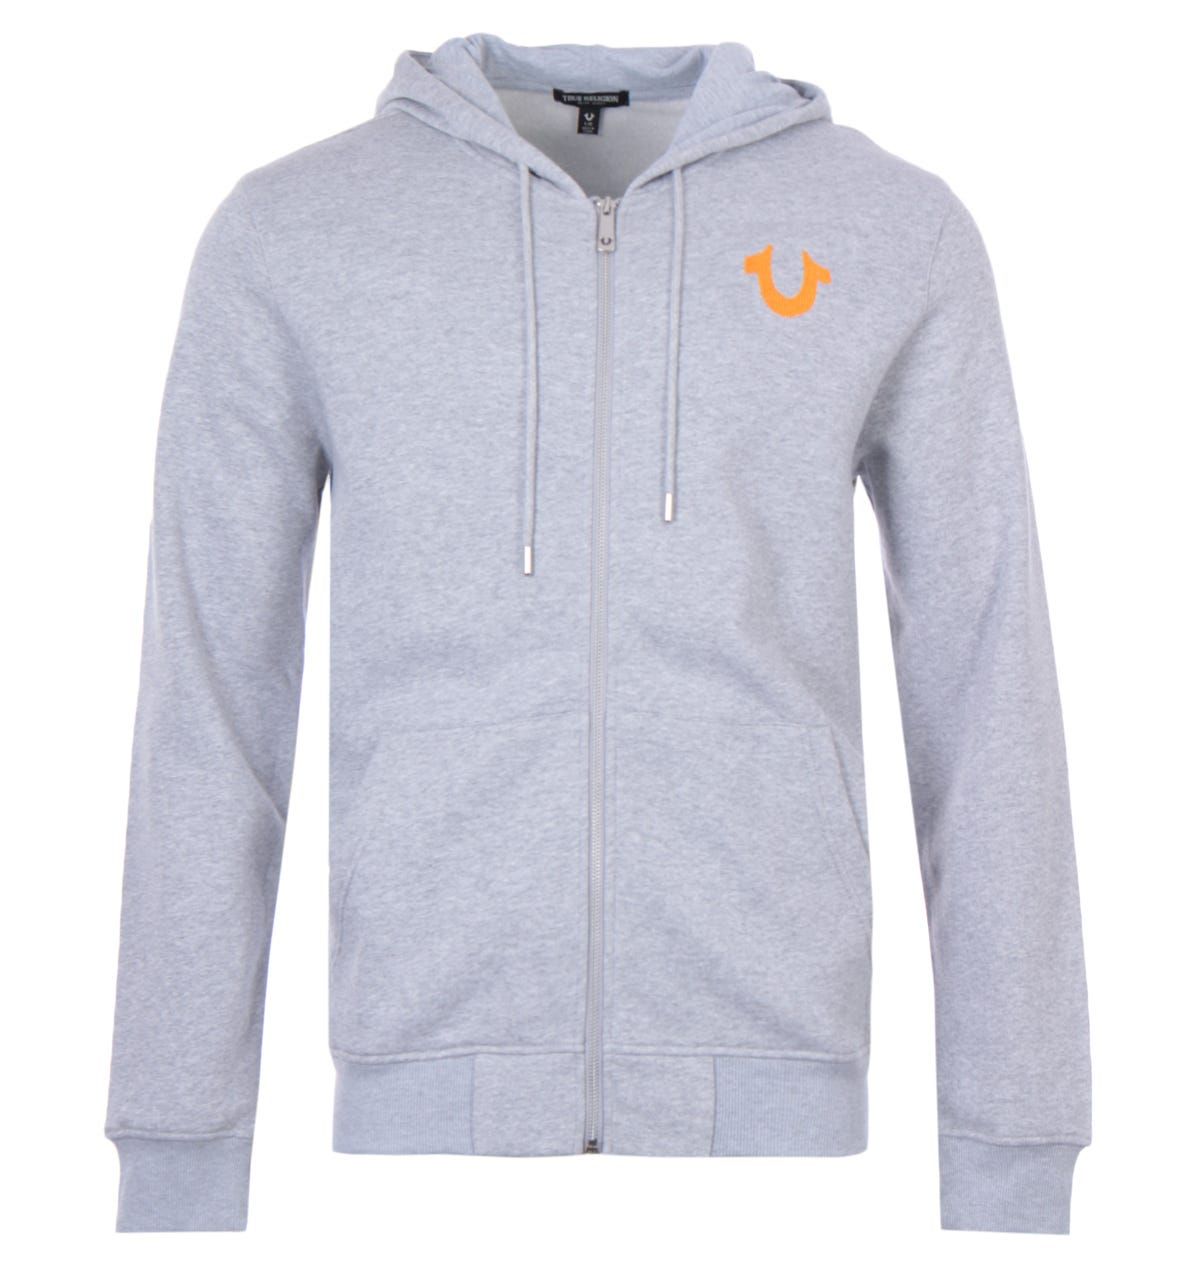 Comfortable and stylish, the Anthem Logo Zip Hooded Sweatshirt from True Religion offers an easy, go-to style. Crafted from a soft cotton blend with a fleece like interior and cut in a regular fit for day-long comfort. Featuring an adjustable drawstring hood, full zip closure and a split kangaroo pocket. Finished with the iconic True Religion horseshoe logo embroidered at the chest and a seasonal graphic print to the back.Regular Fit, Cotton Blend Composition, Adjustable Drawstring Hood, Full Zip Closure, Split Kangaroo Pocket, Ribbed Cuffs & Hem, True Religion Branding. Fit & Style:Regular Fit, Fits True to Size. Composition & Care:80% Cotton, 20% Polyester, Machine Wash.